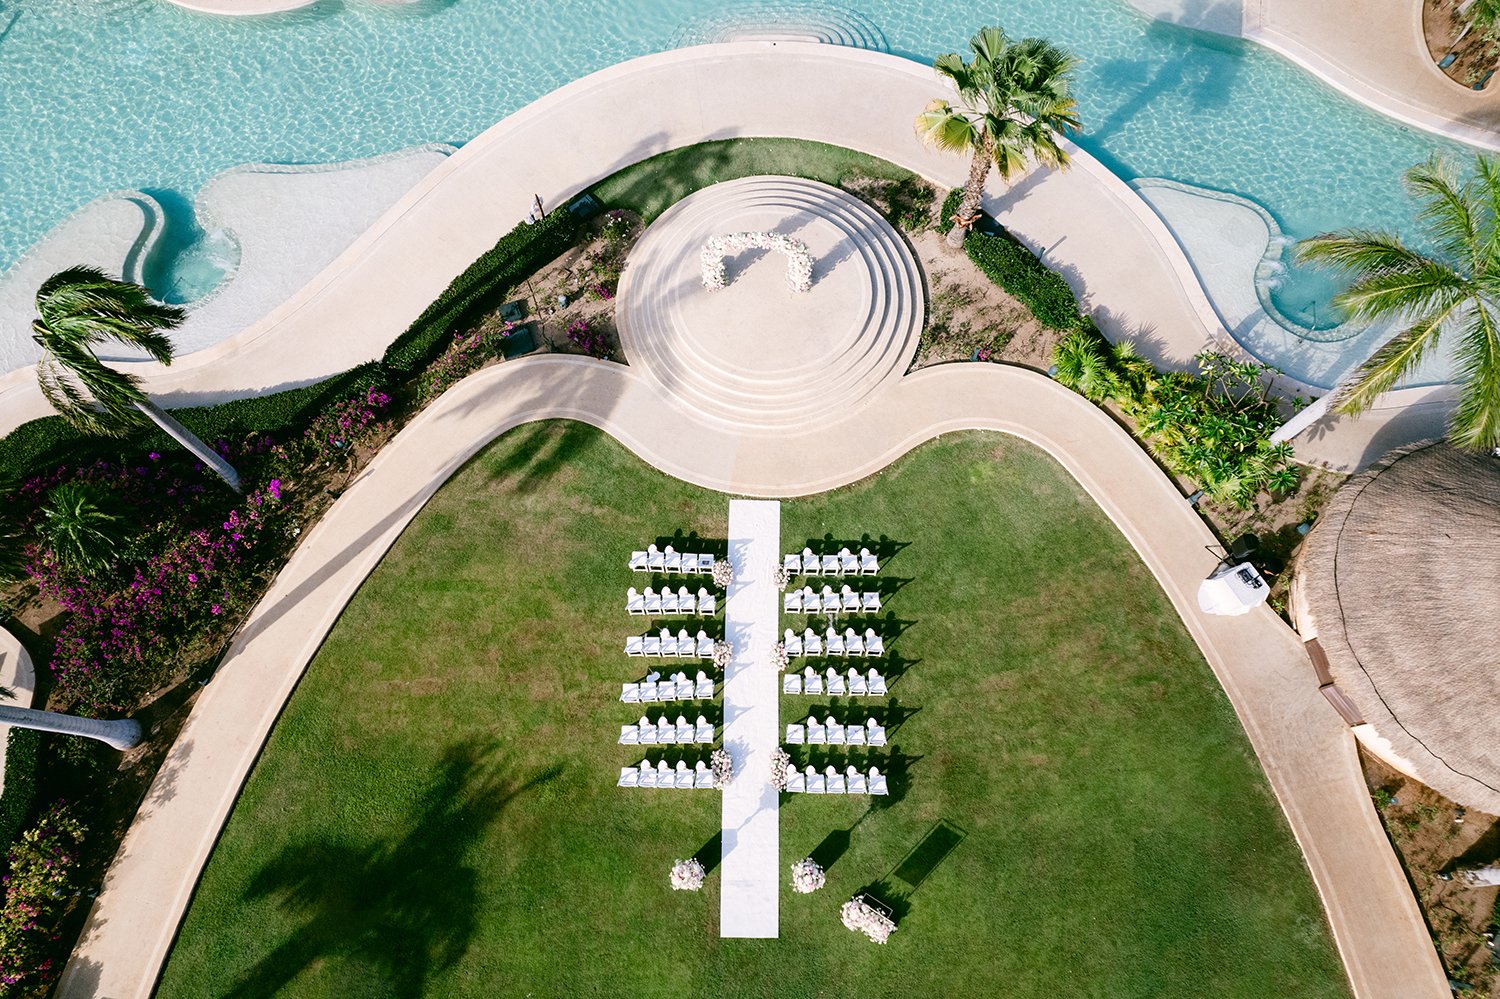 31 amazing hotel spot for wedding ceremony with decoration ready over grass at Dreams Riviera Cancun Mexico.JPG